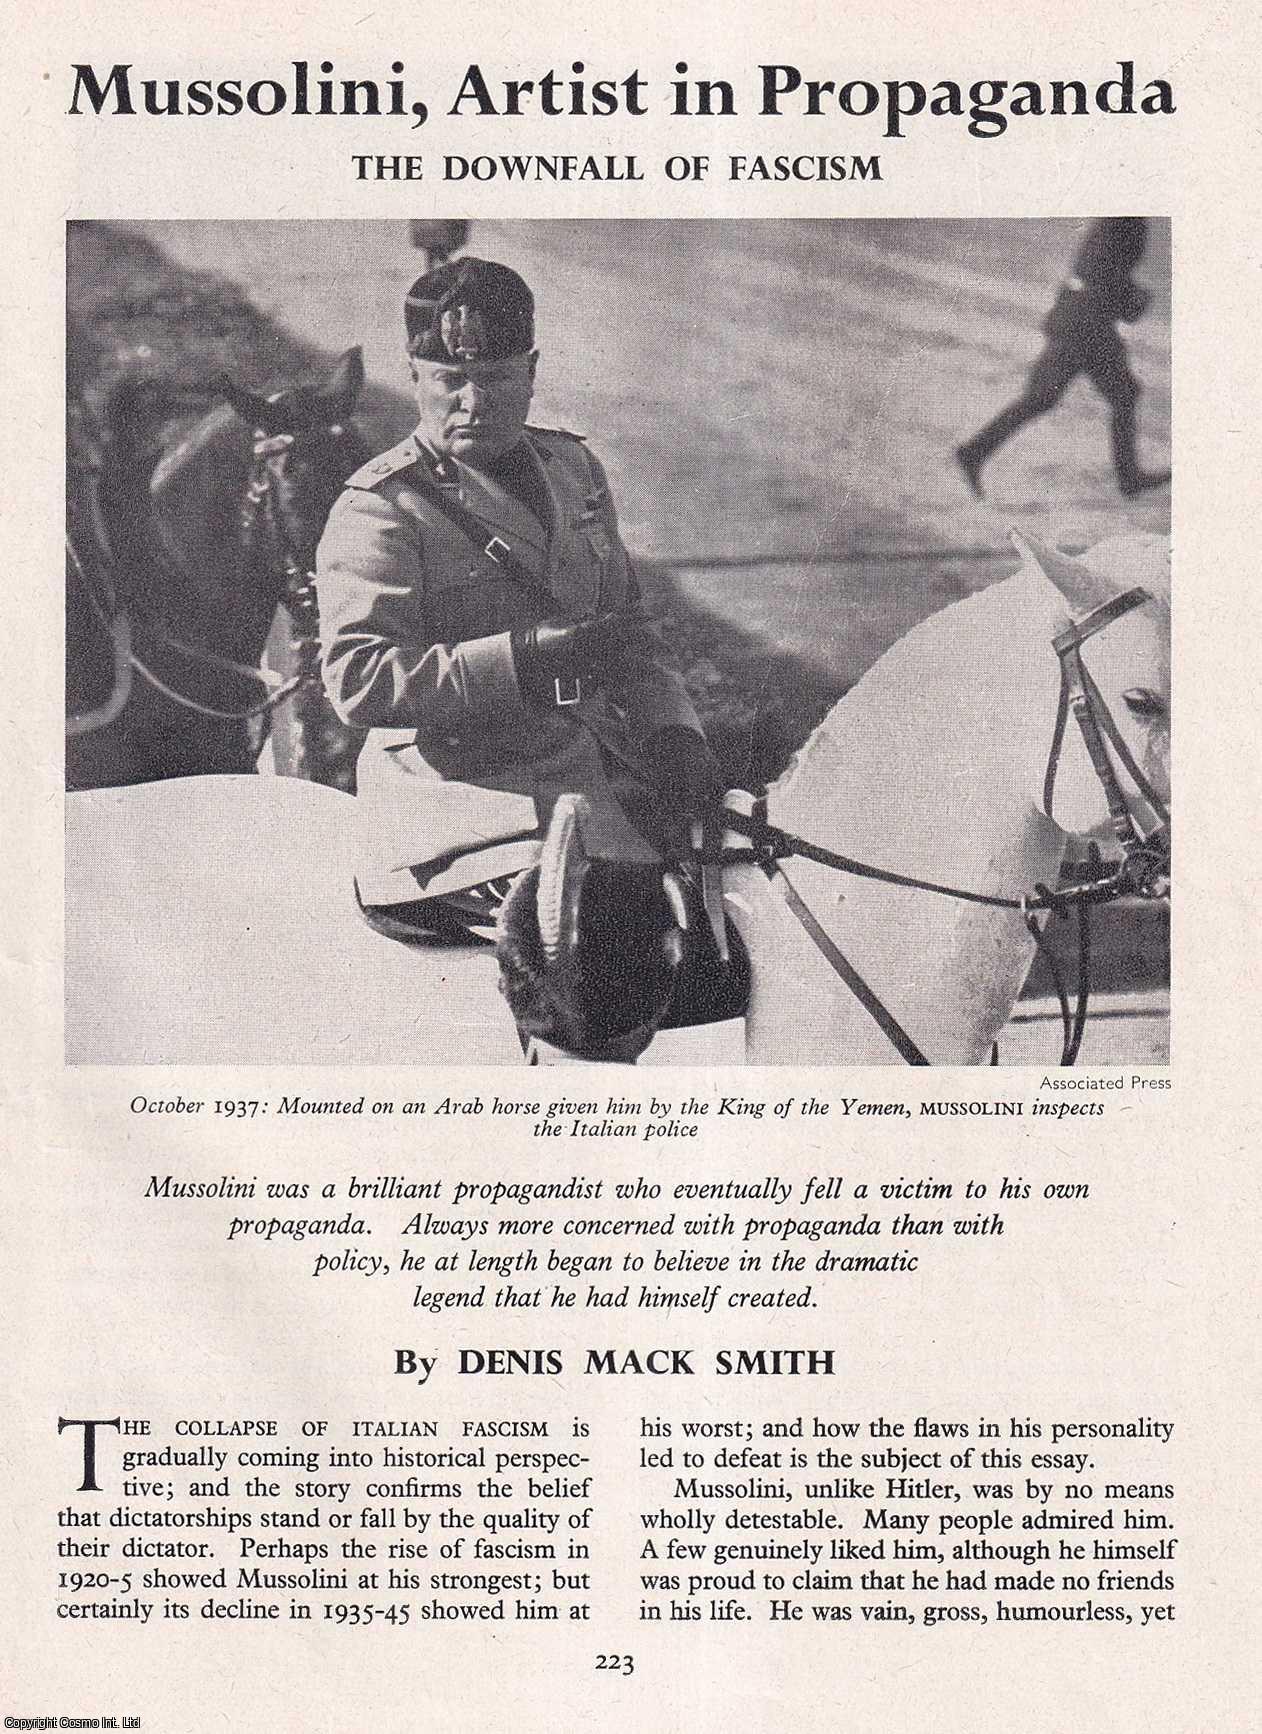 Denis Mack Smith - Mussolini, Artist in Propaganda: The Downfall of Fascism. An original article from History Today magazine, 1959.